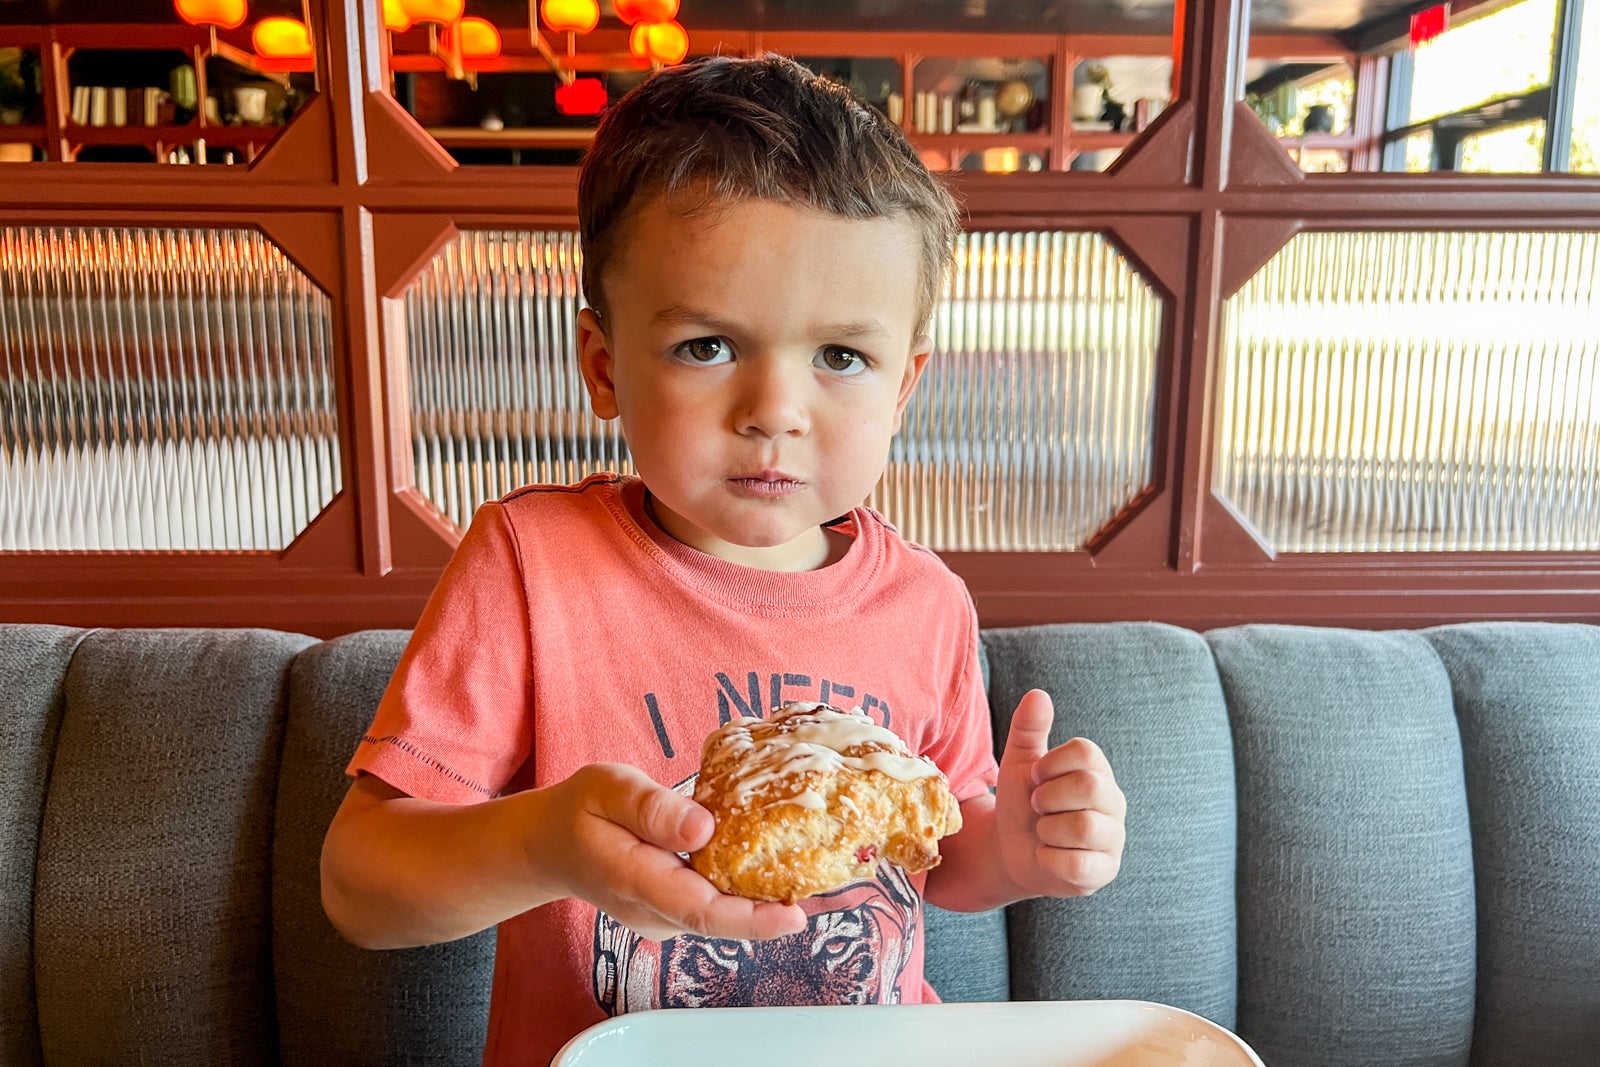 Child eating pastry